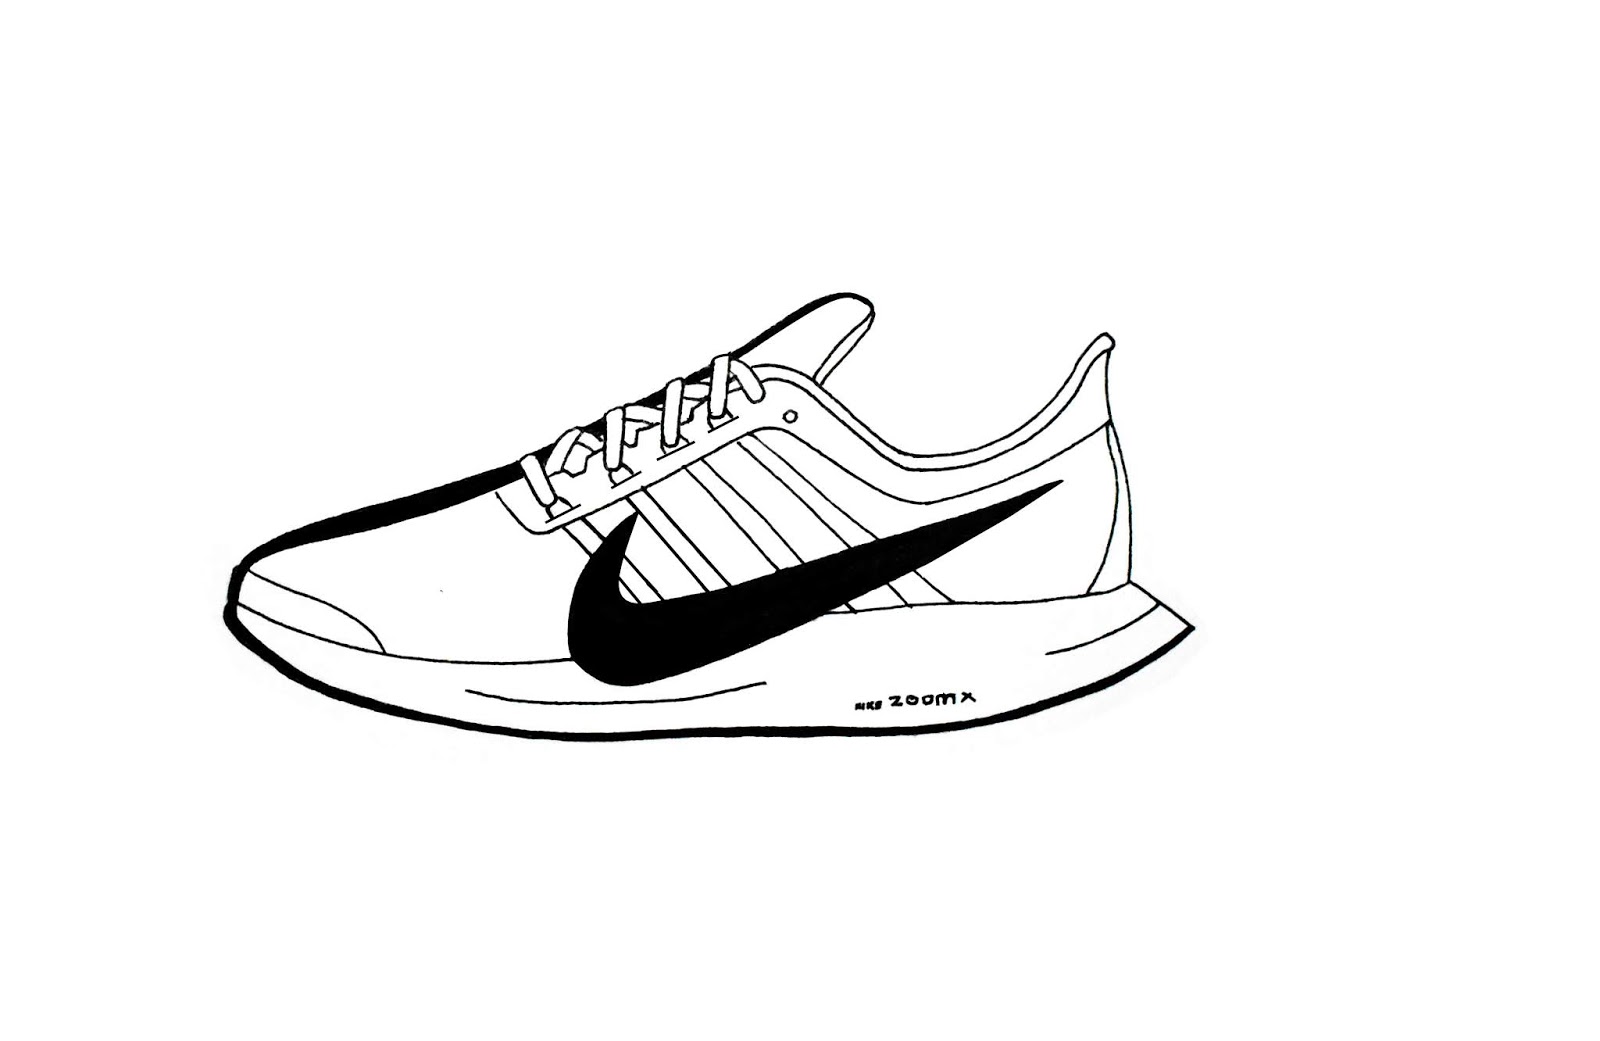 sketch of nike shoes